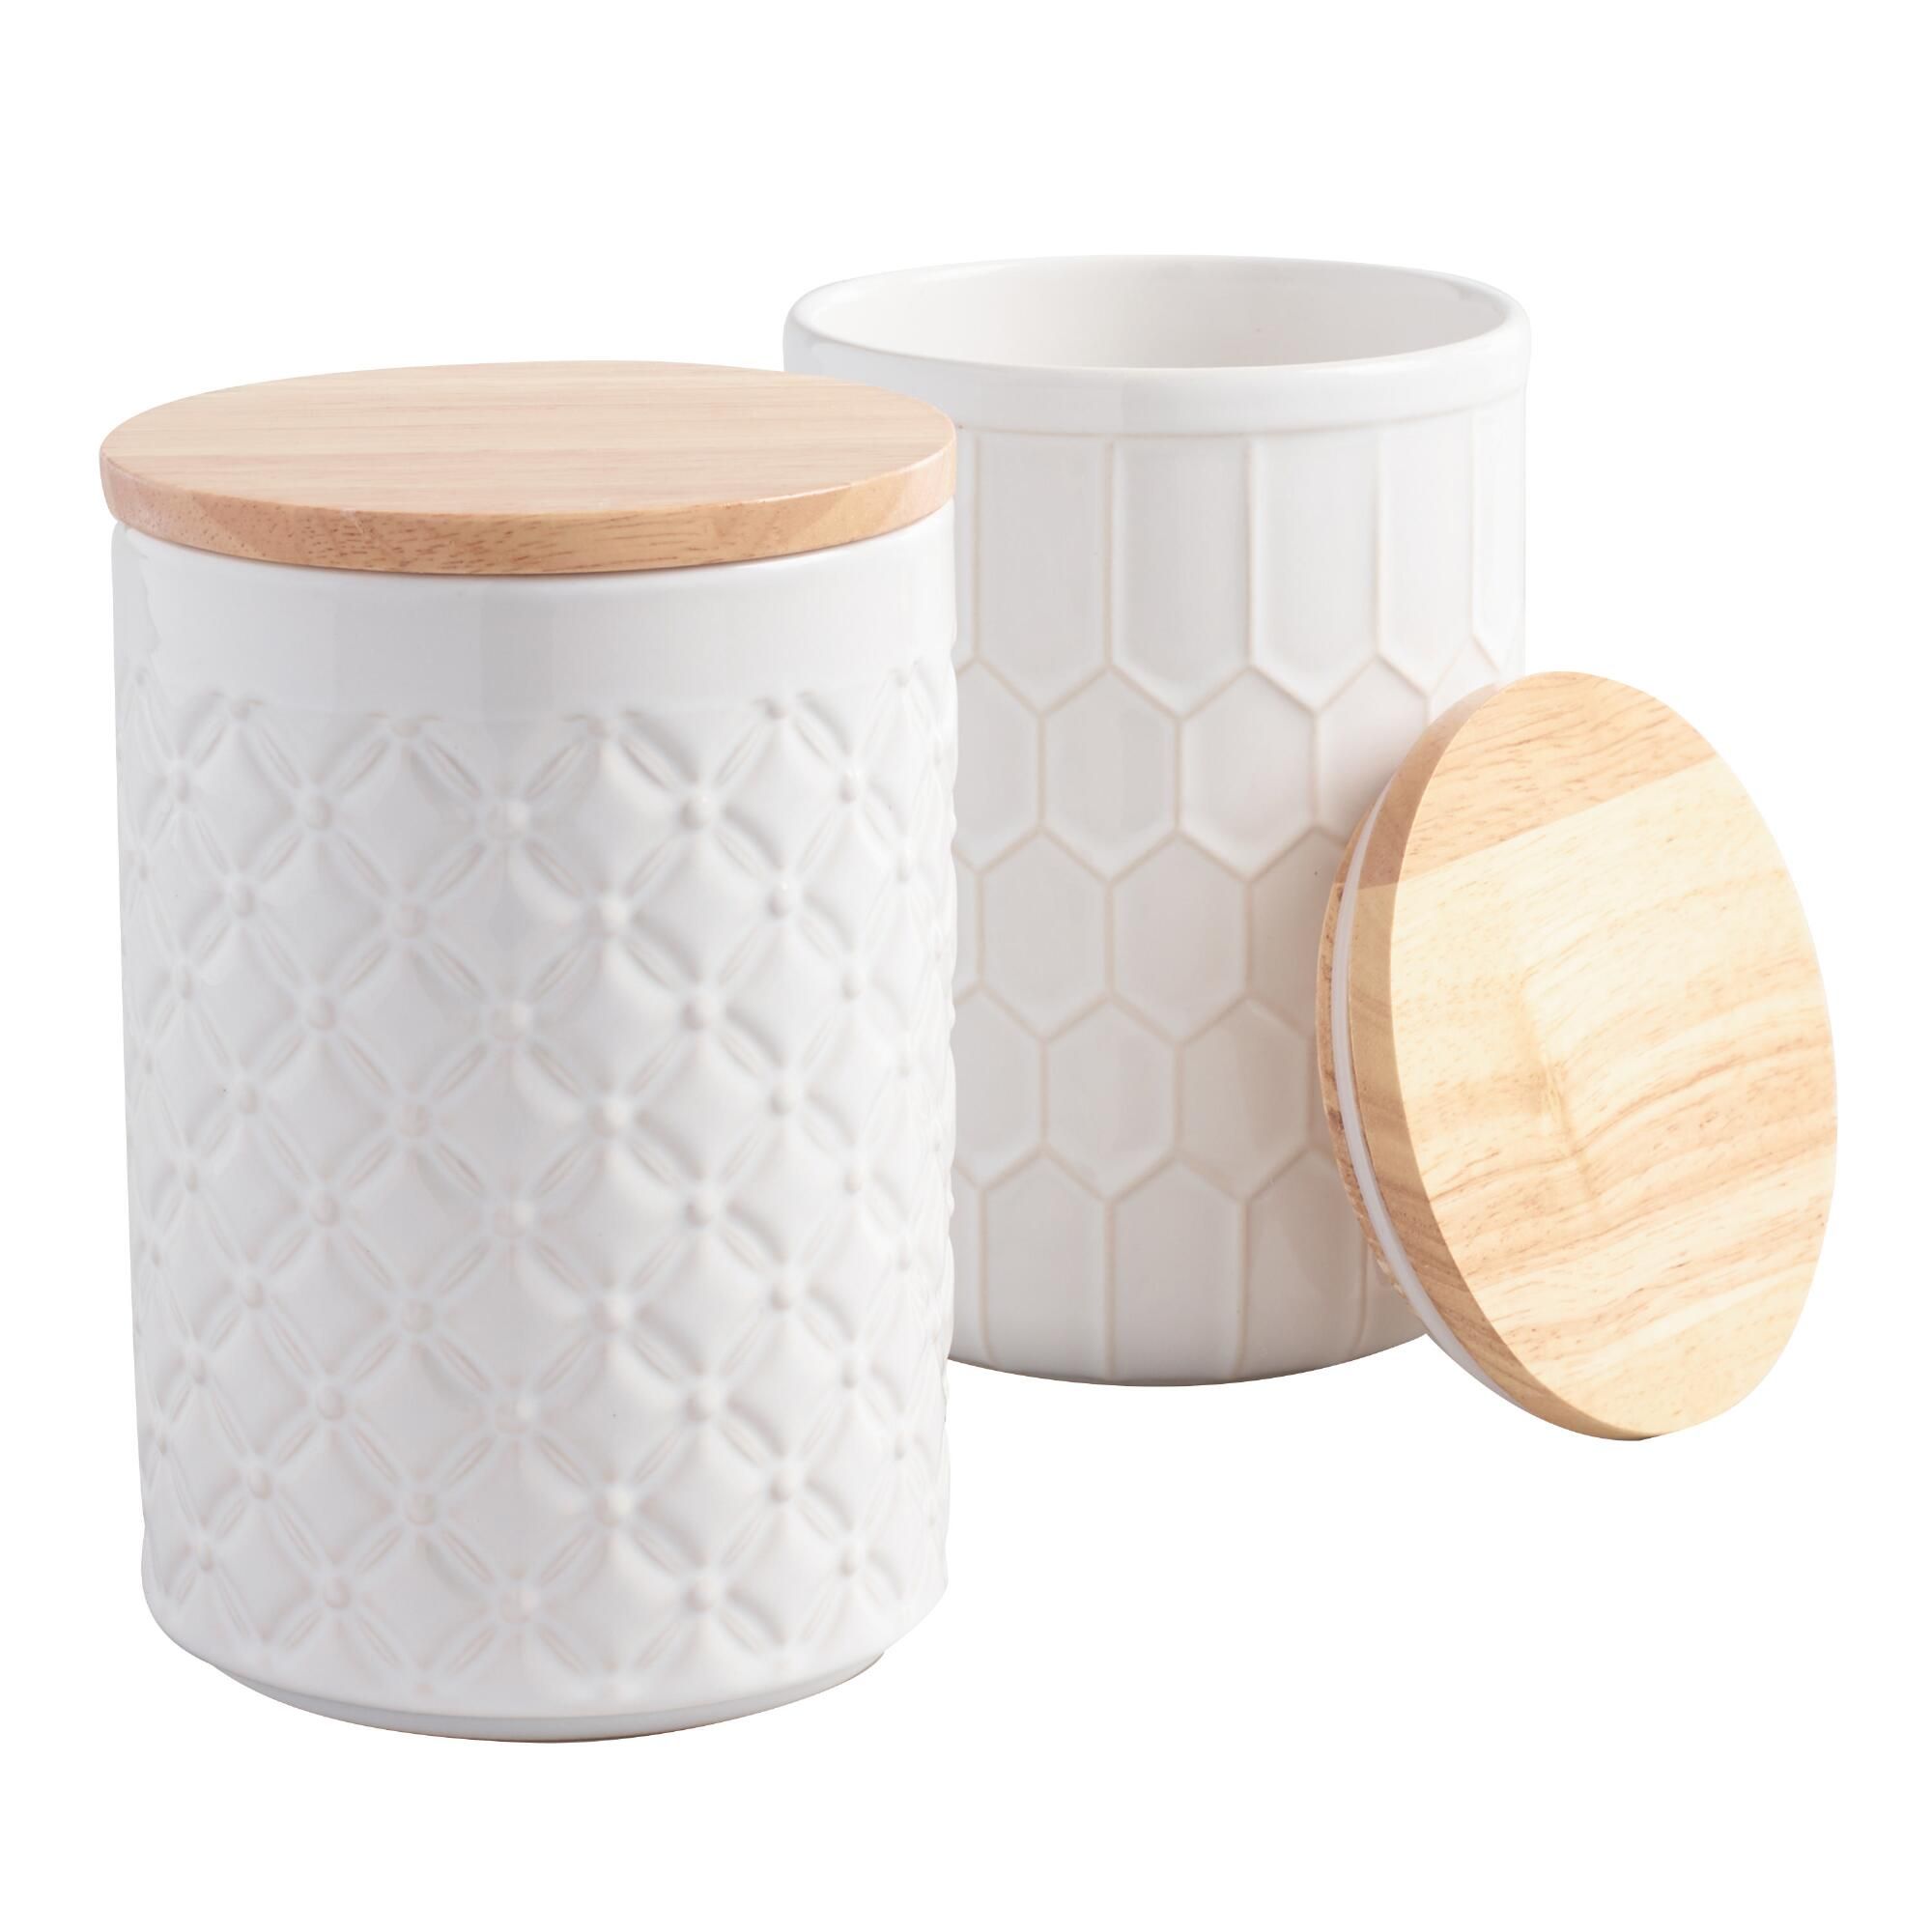 White Textured Ceramic Canisters with Bamboo Lids Set of 2 by World Market | World Market